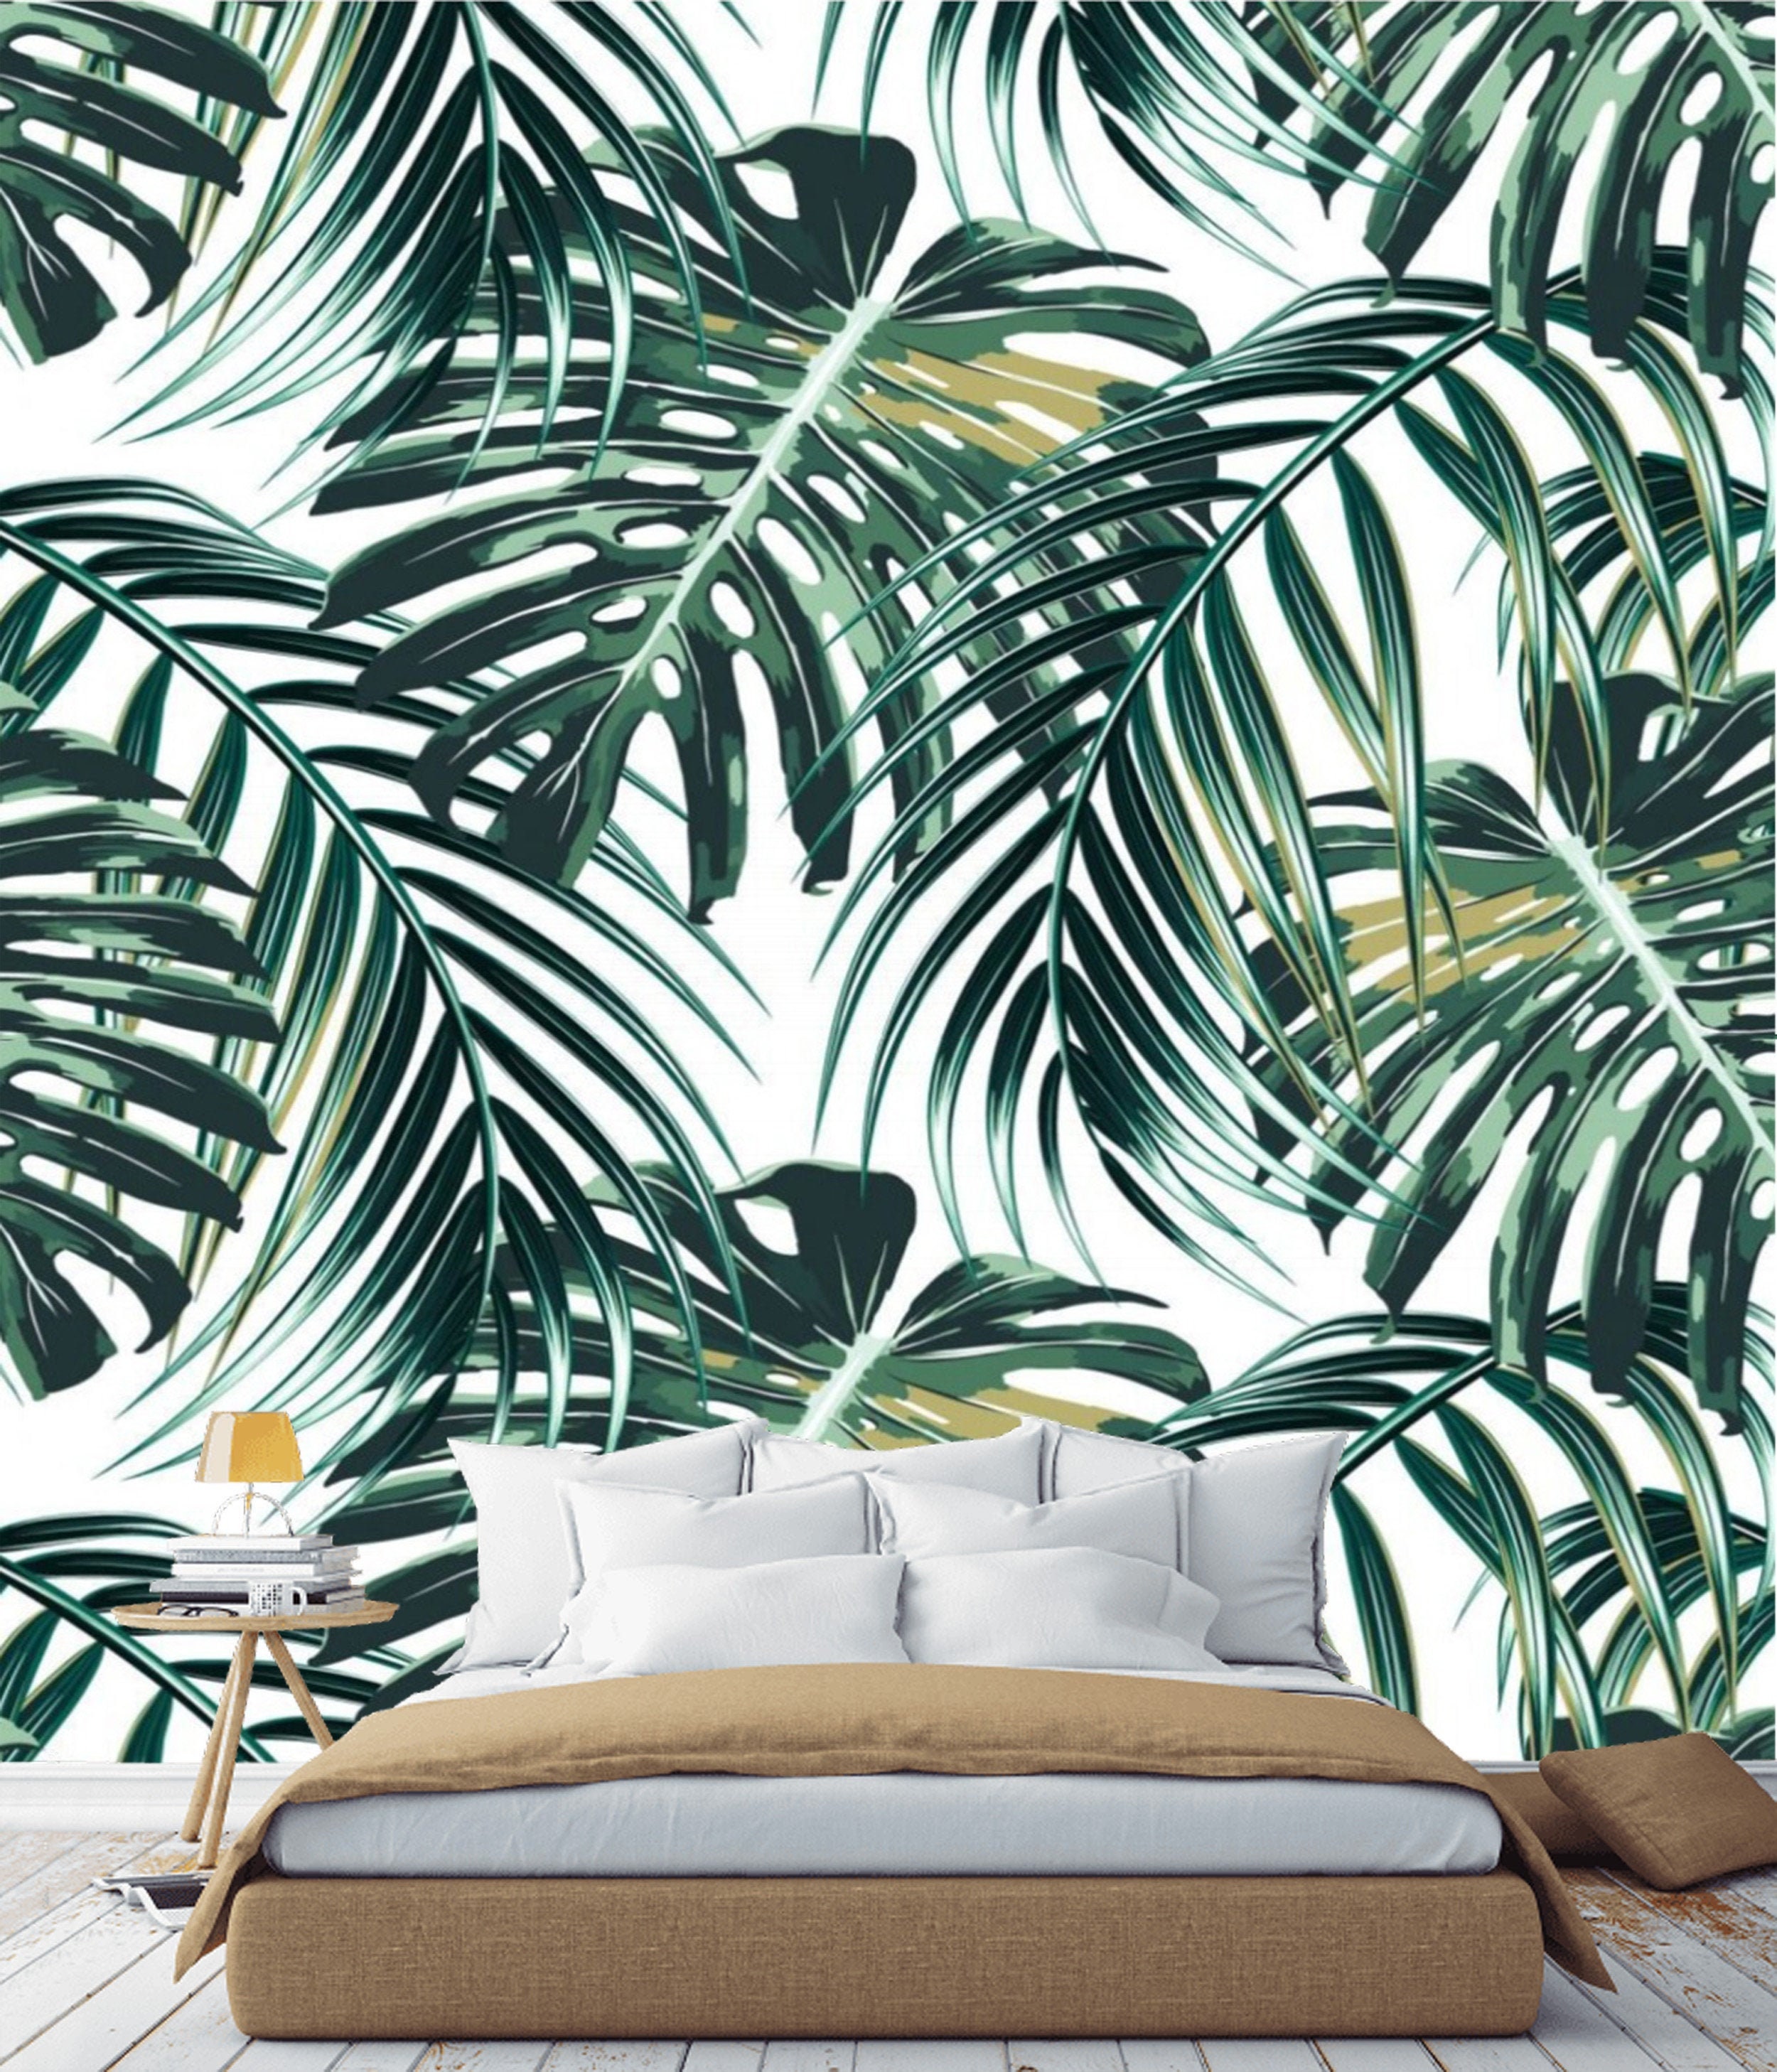 Peel and Stick Wallpaper Tropical Palm Leaves Wallpaper Mural | Etsy